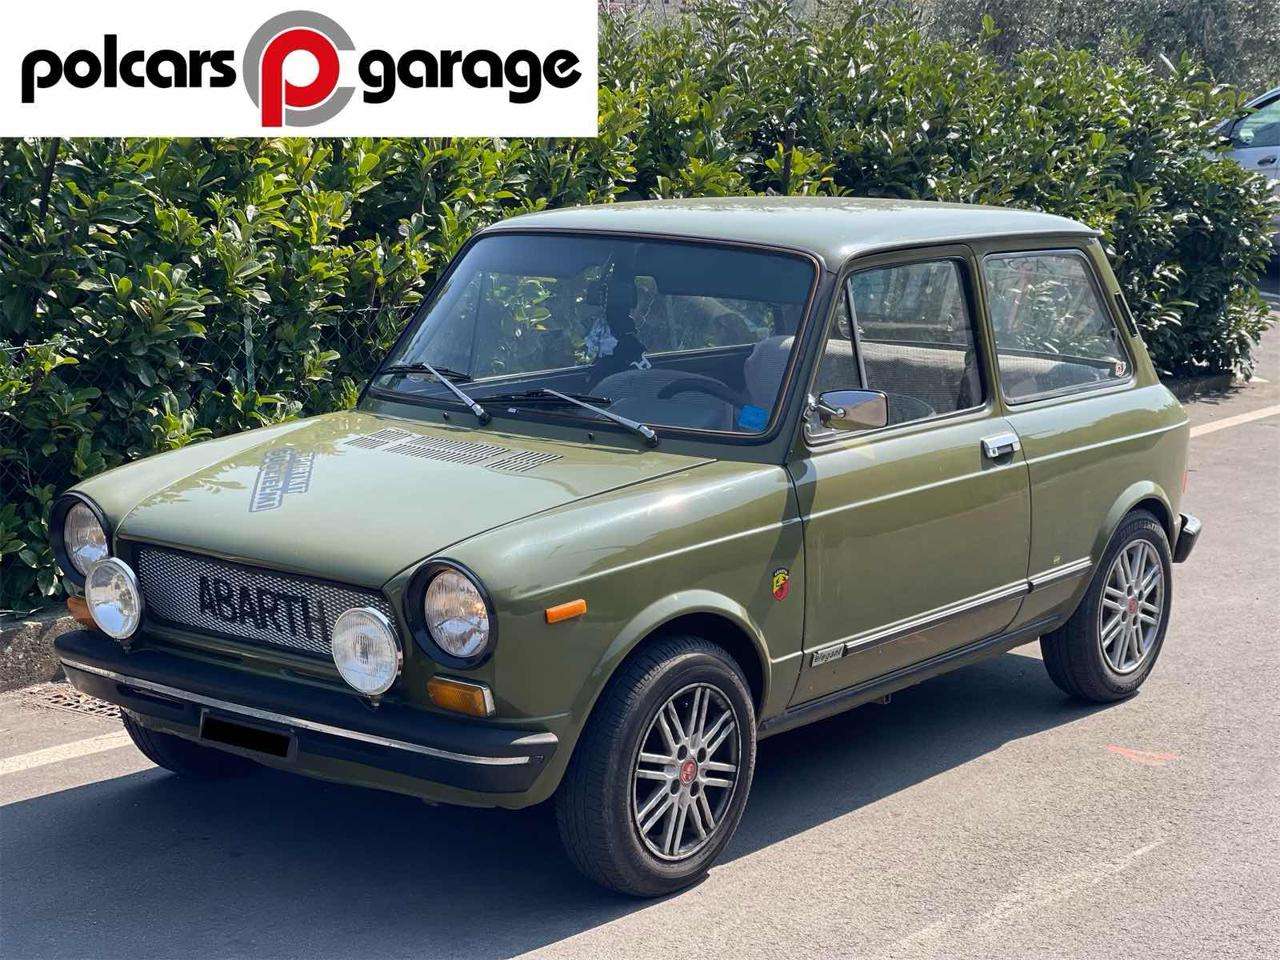 Autobianchi A 112 Compact in Green used in Colceresa - Vicenza for € 5,800.-